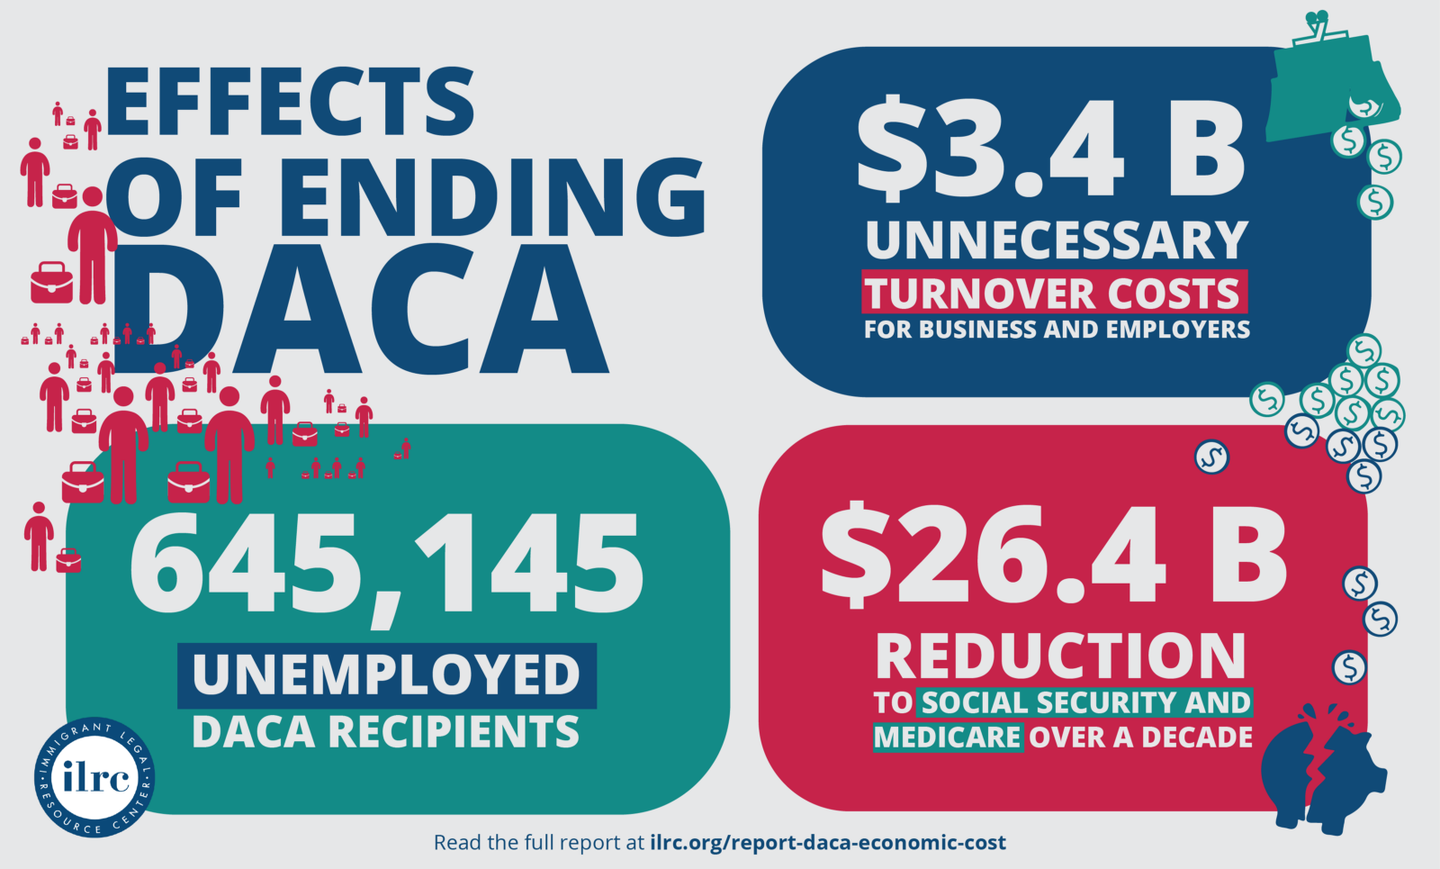 Infographic showing the costs and effects of ending DACA